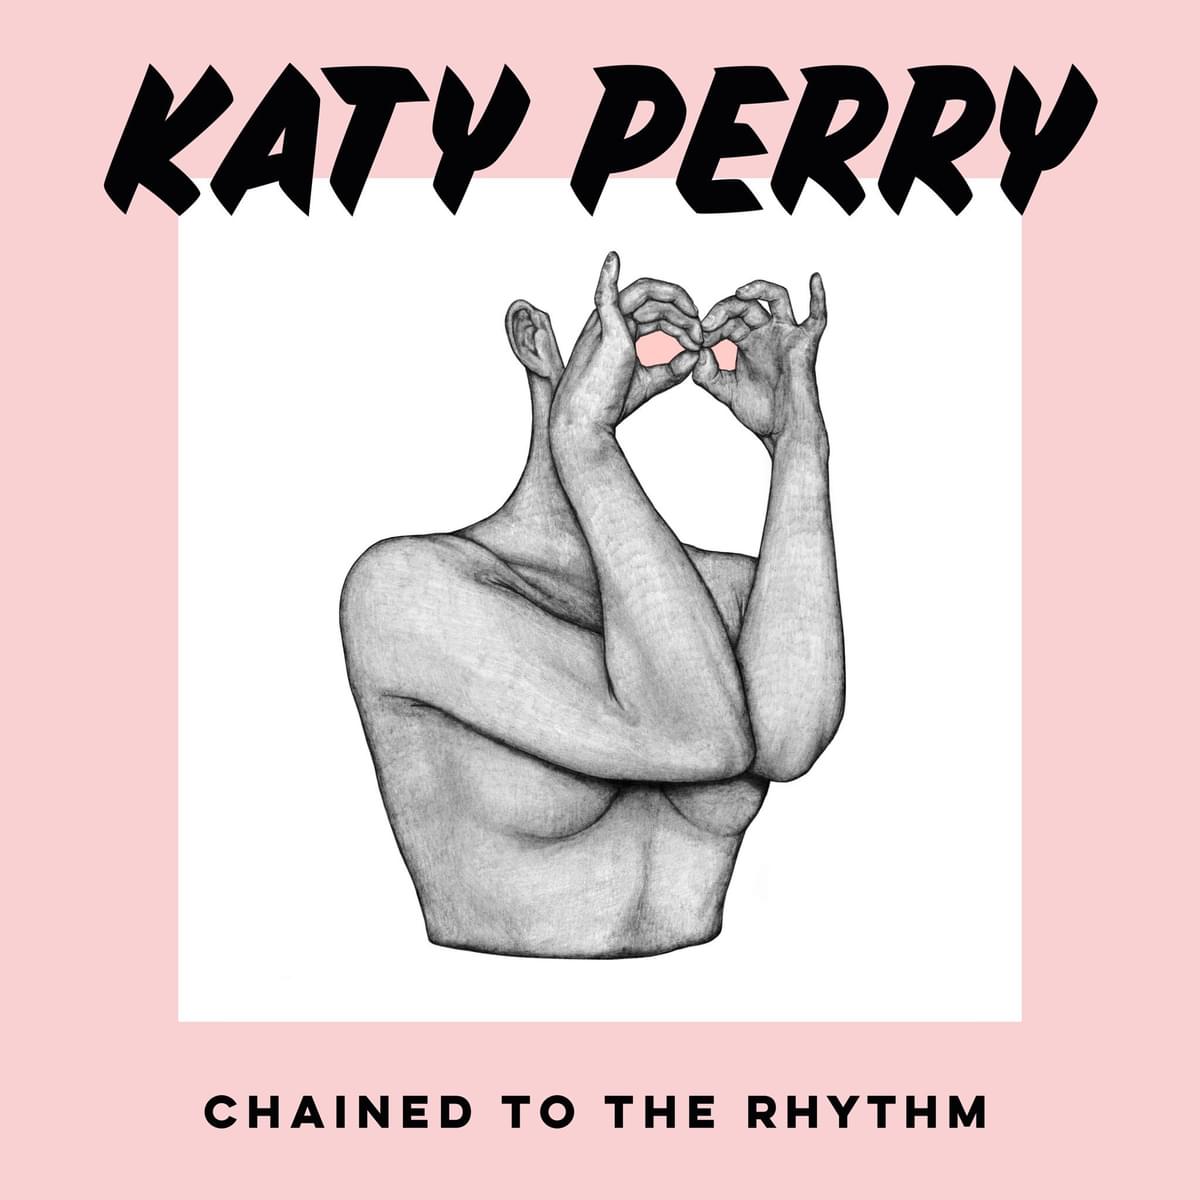 Katy perry chained to the rhythm